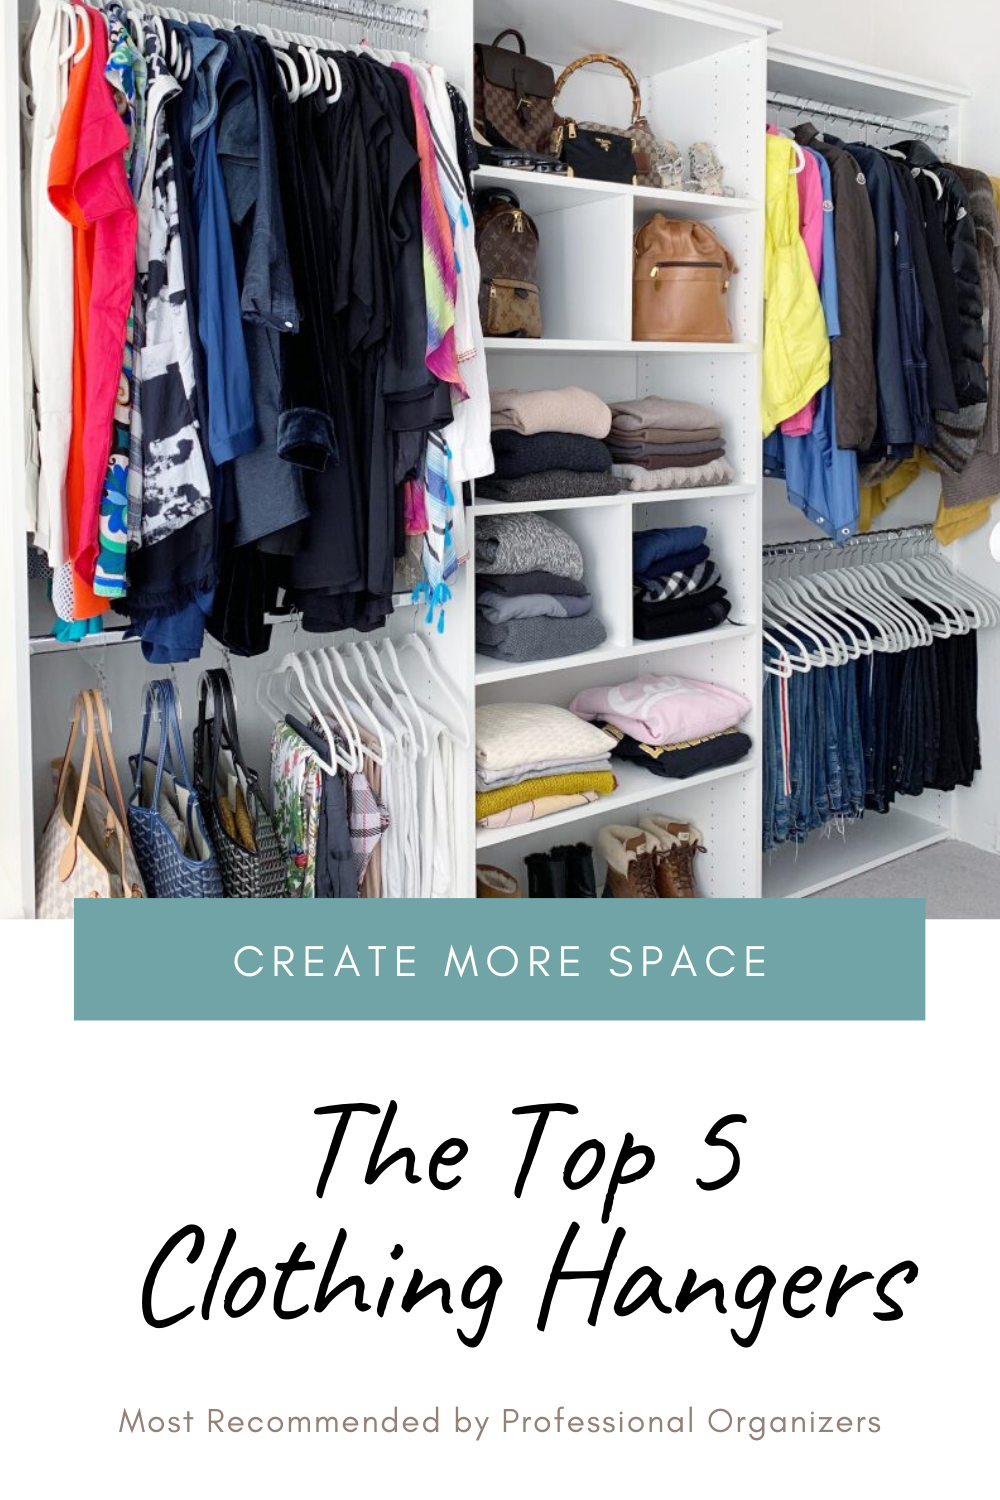 https://simplyorganized.me/wp-content/uploads/2020/04/the-top-5-clothing-hangers-recommended-by-professional-organizers.png